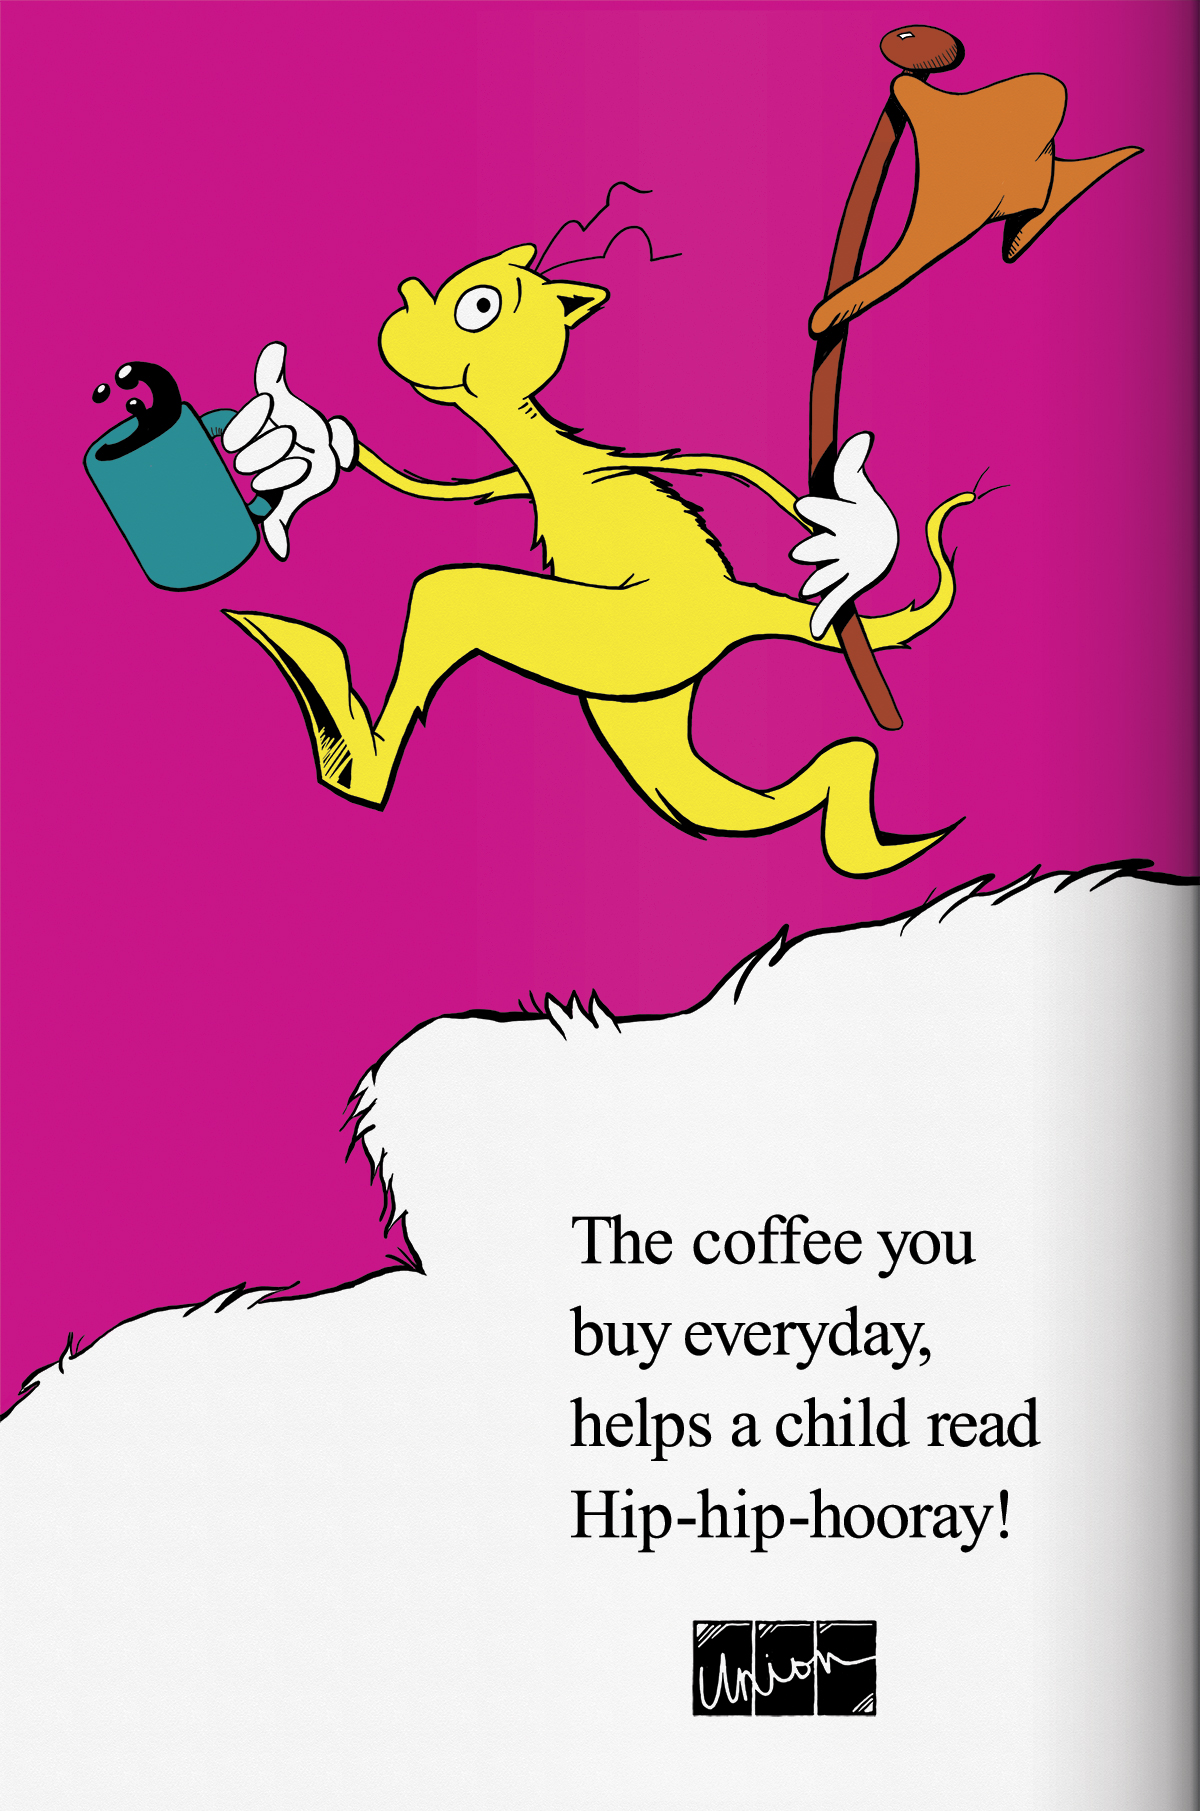 Union Coffee Poster for Child Literacy - Dr. Seuss â€œFlagâ€ by Tidal Wave Marketing